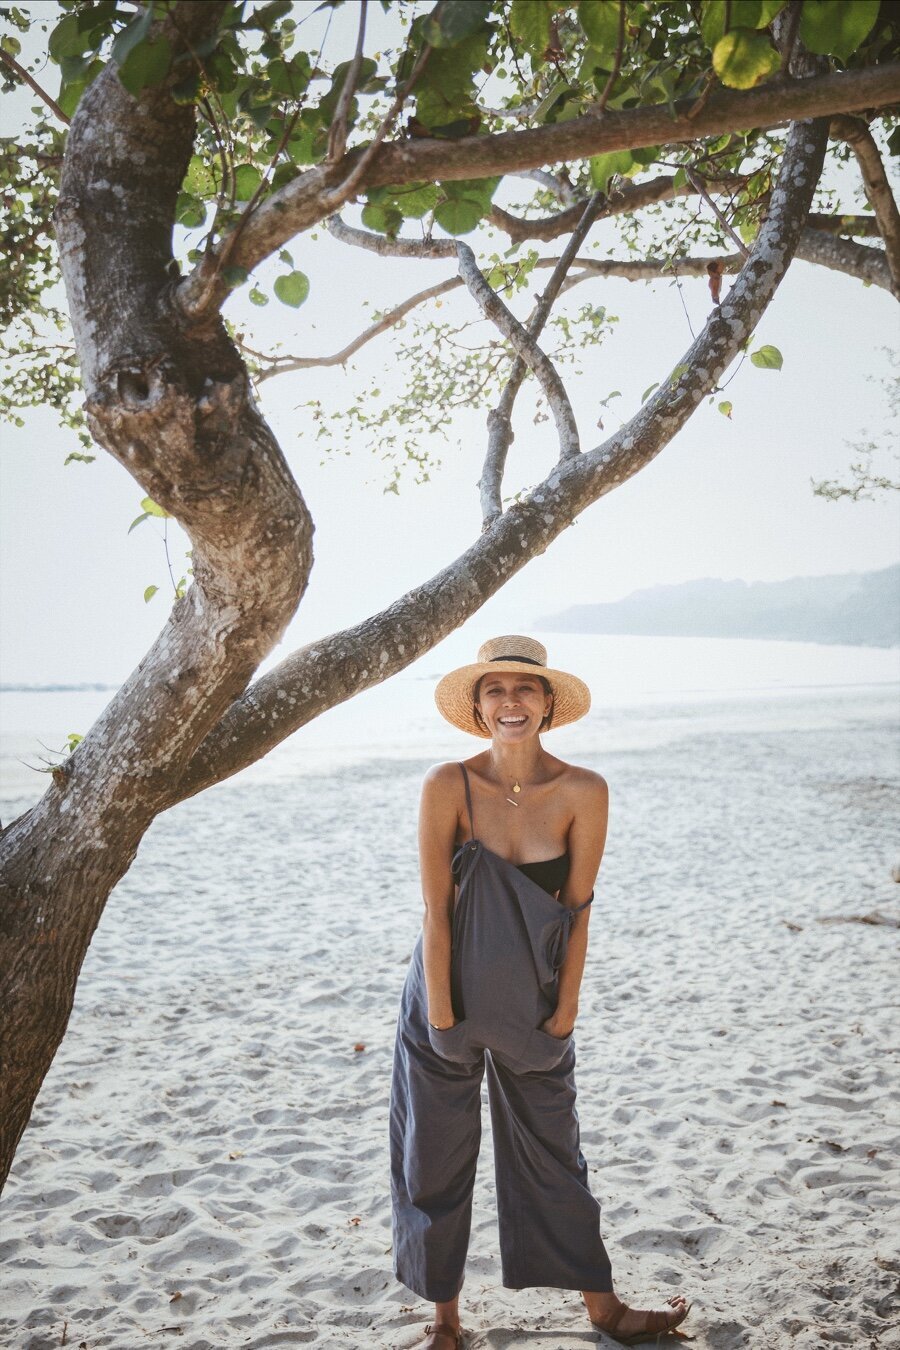 Cara on the beach in overalls and a sun hat for her blog in Vogue Hong Kong